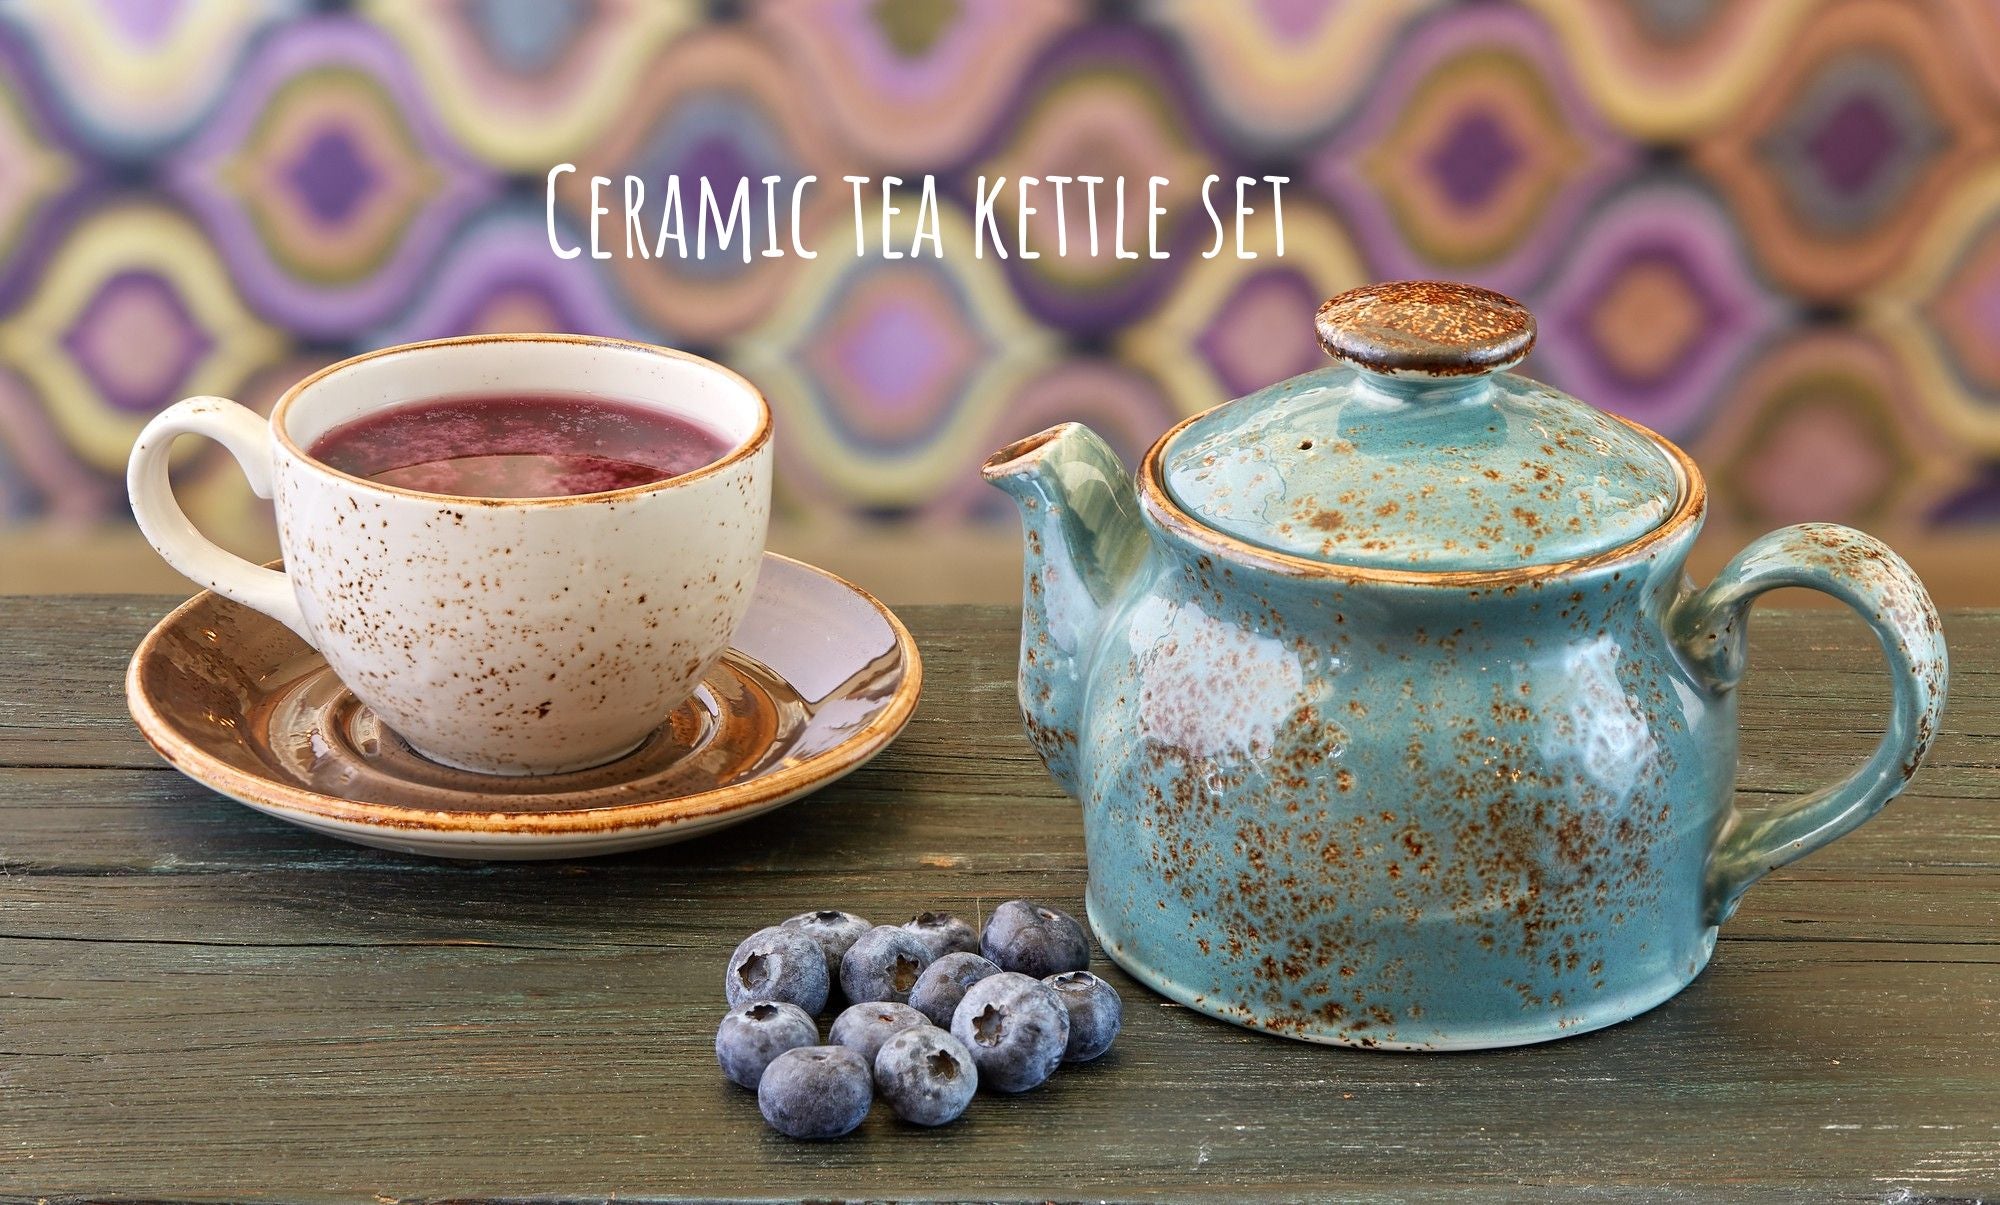 The Top Ceramic Tea Kettles for Your Kitchen